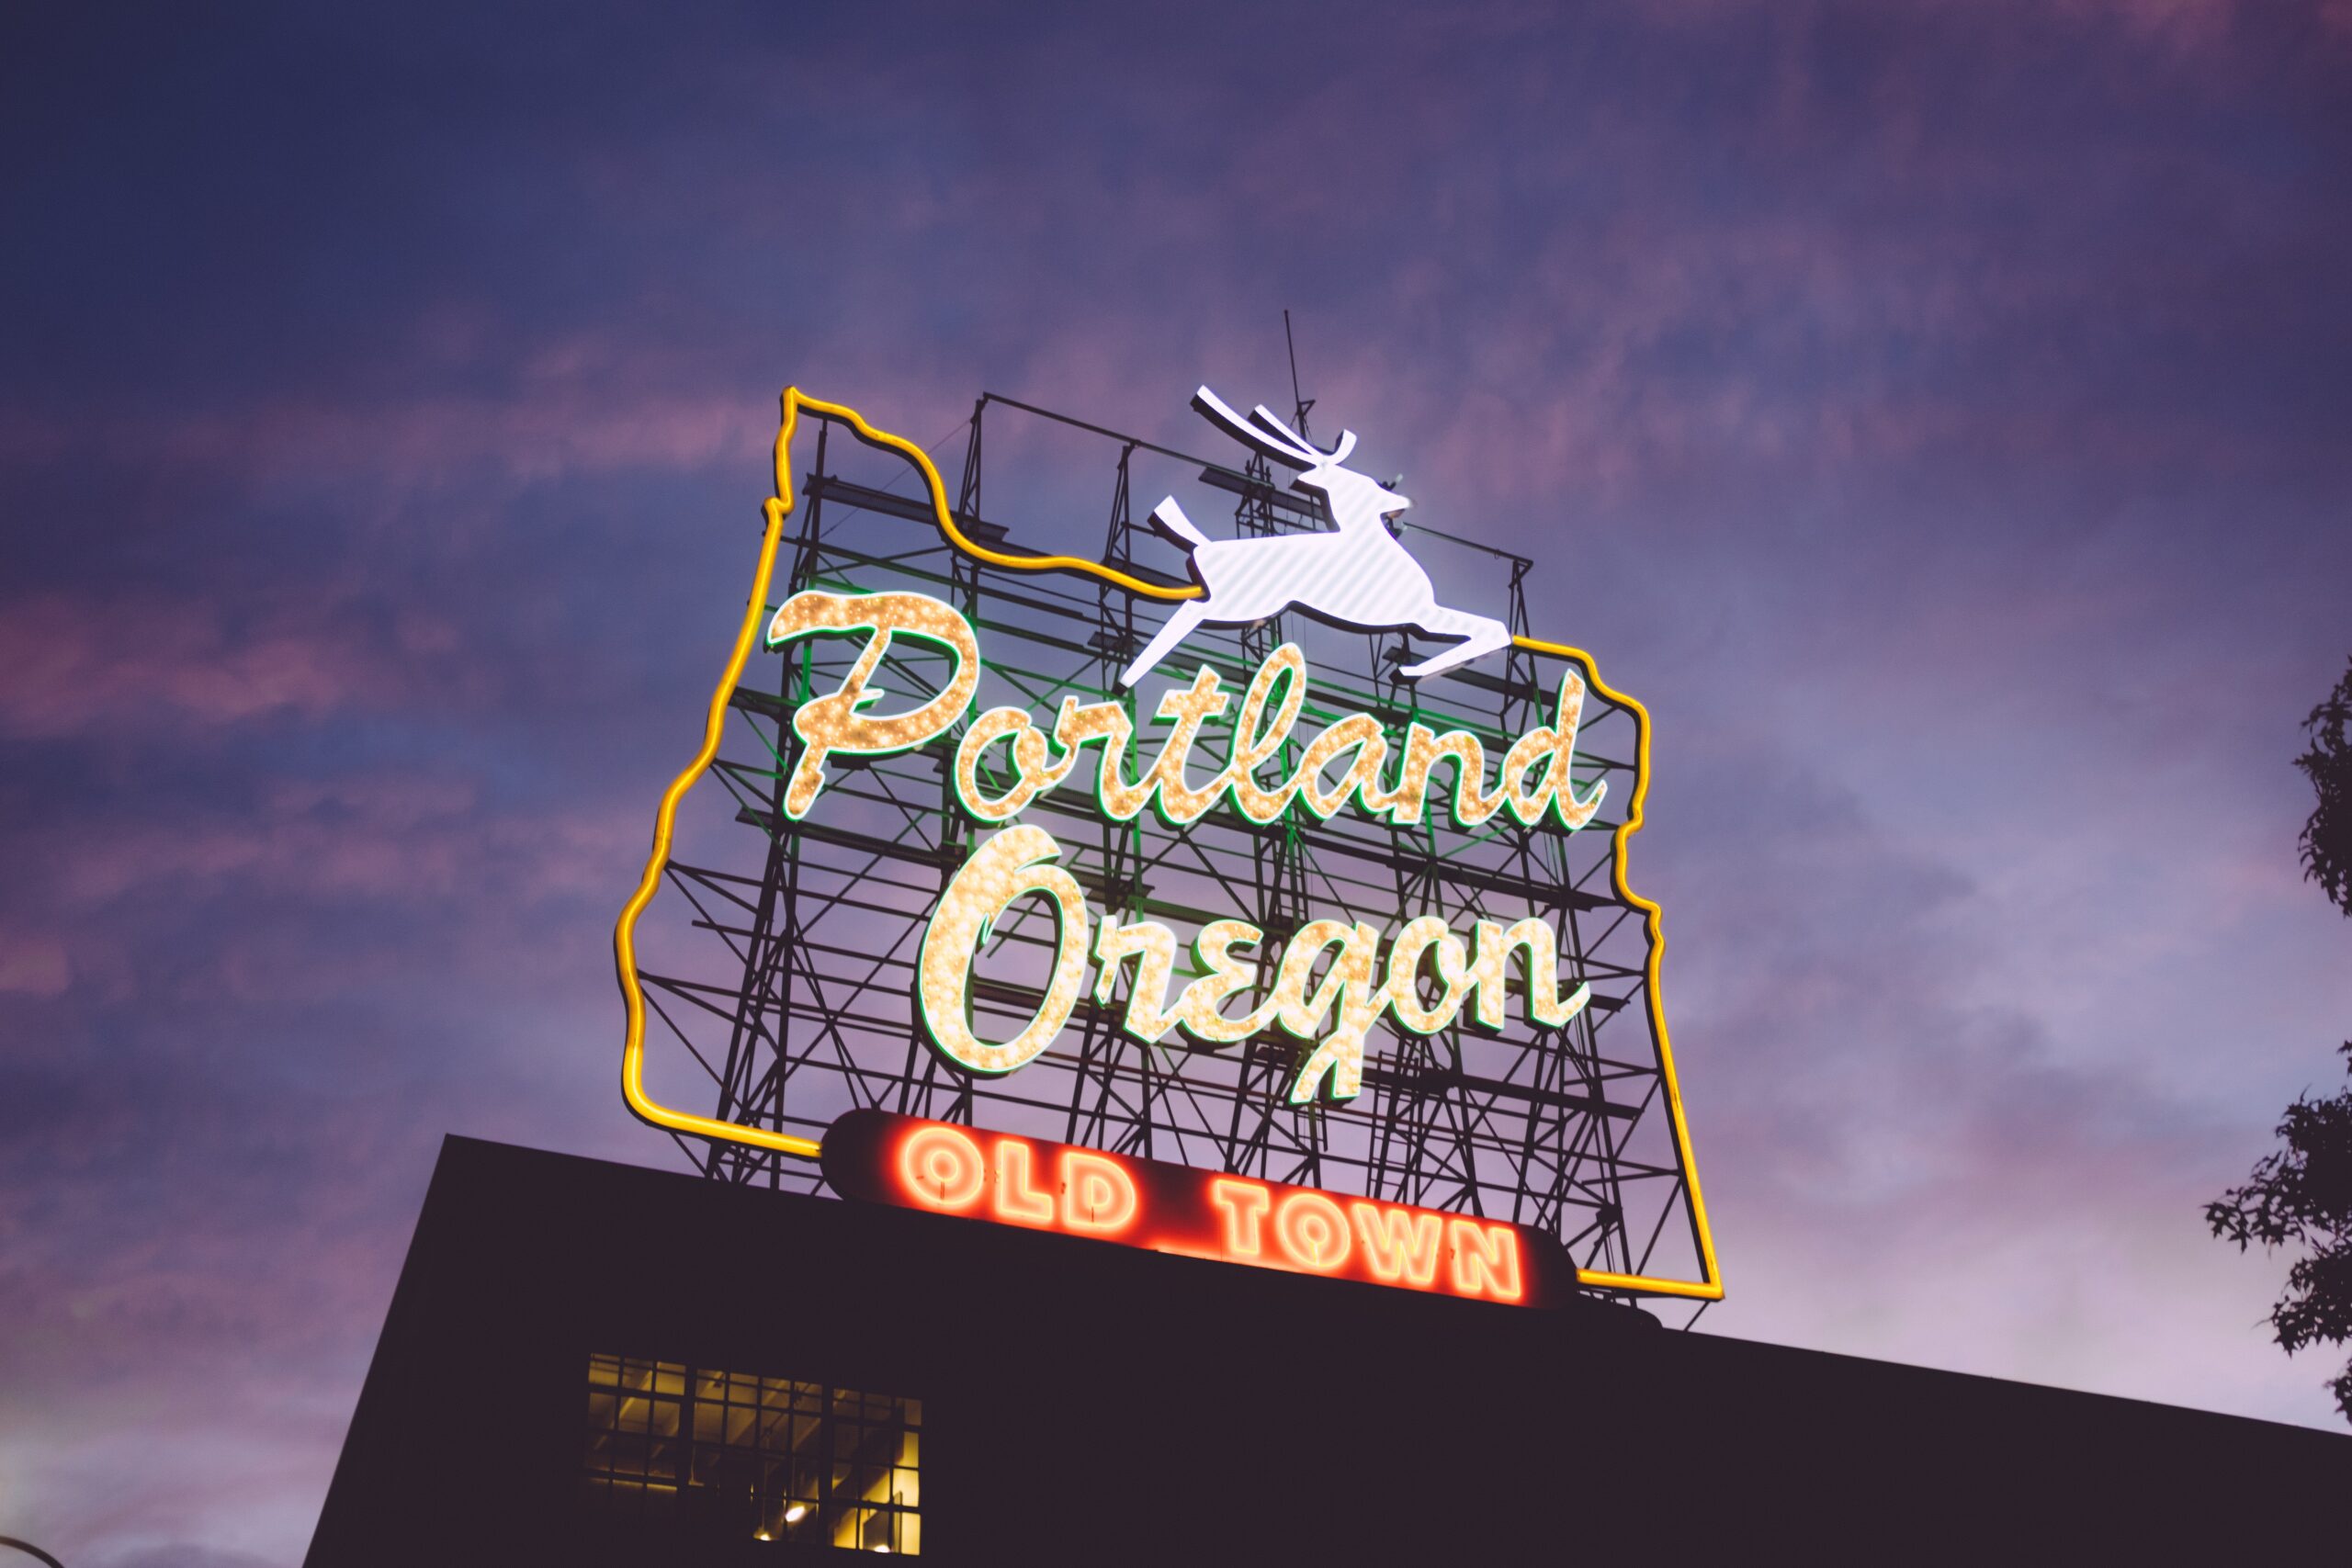 Are you heading to Portland in the summer? Then we've got a line up of activities, sights, and stops, that you have to make while you are here.